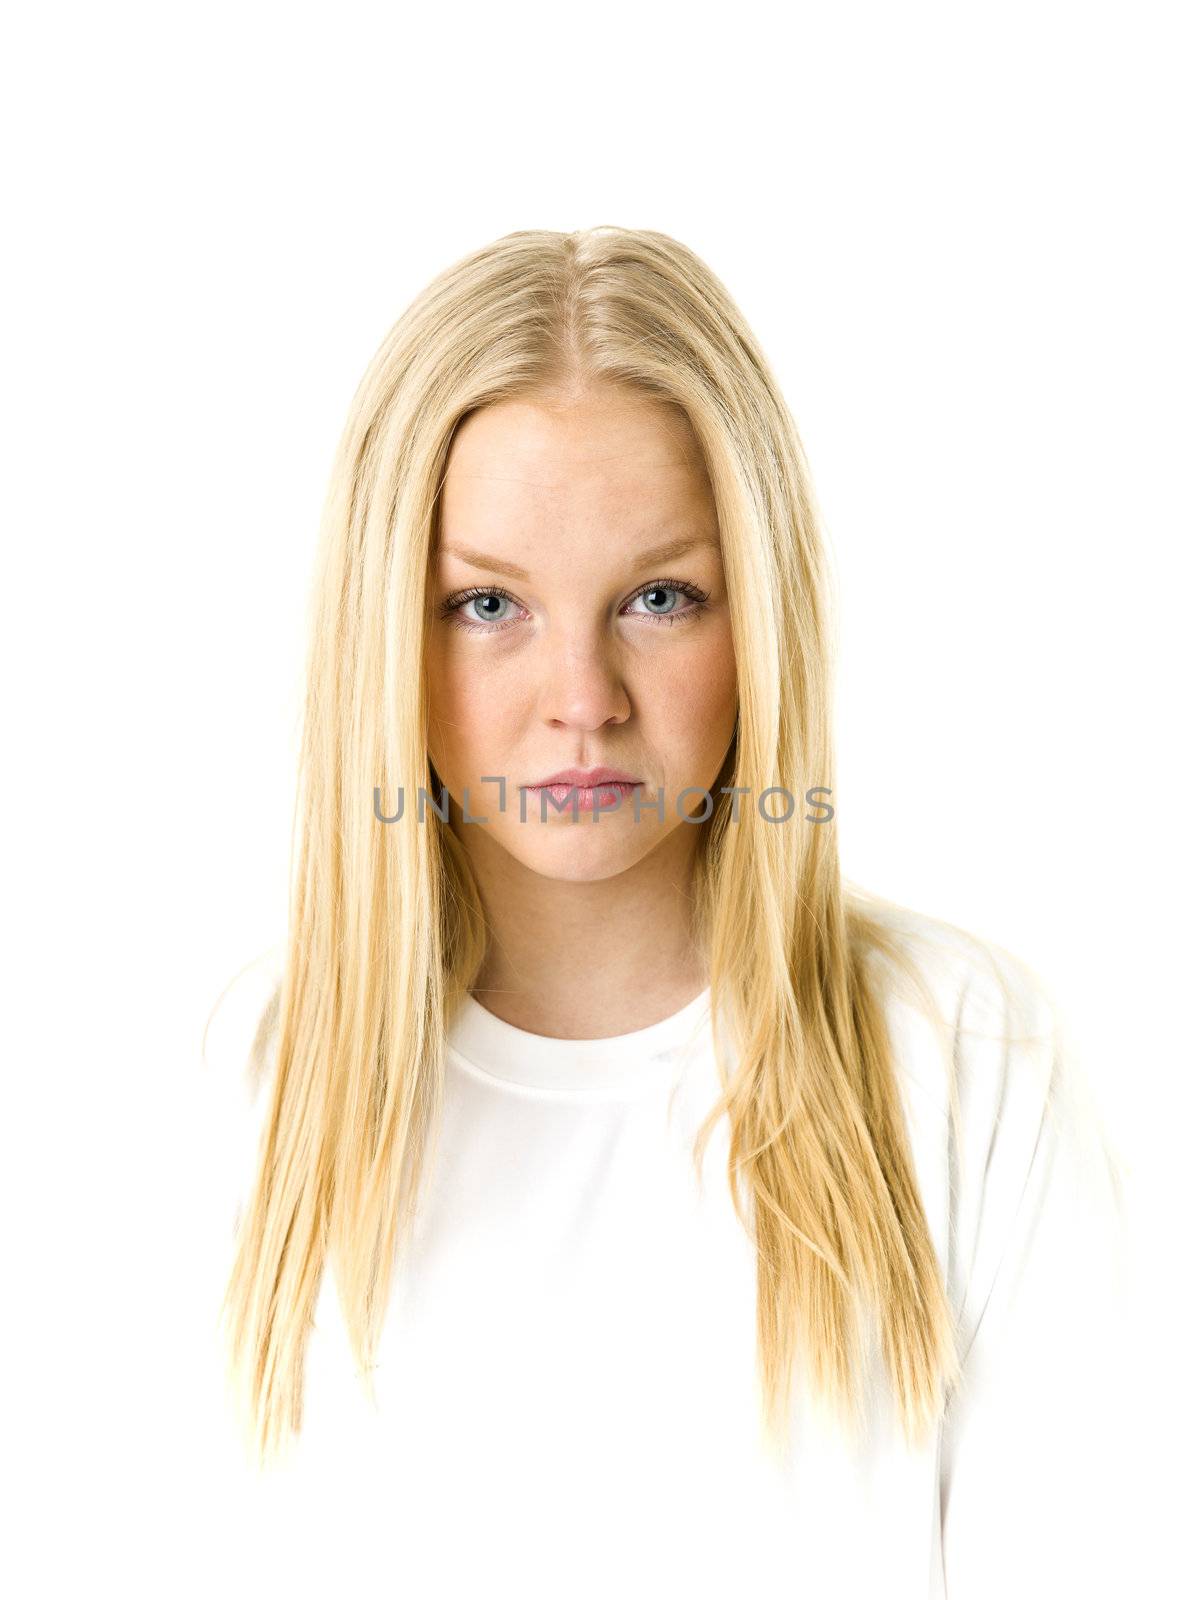 Portrait of a blond woman isolated on white background